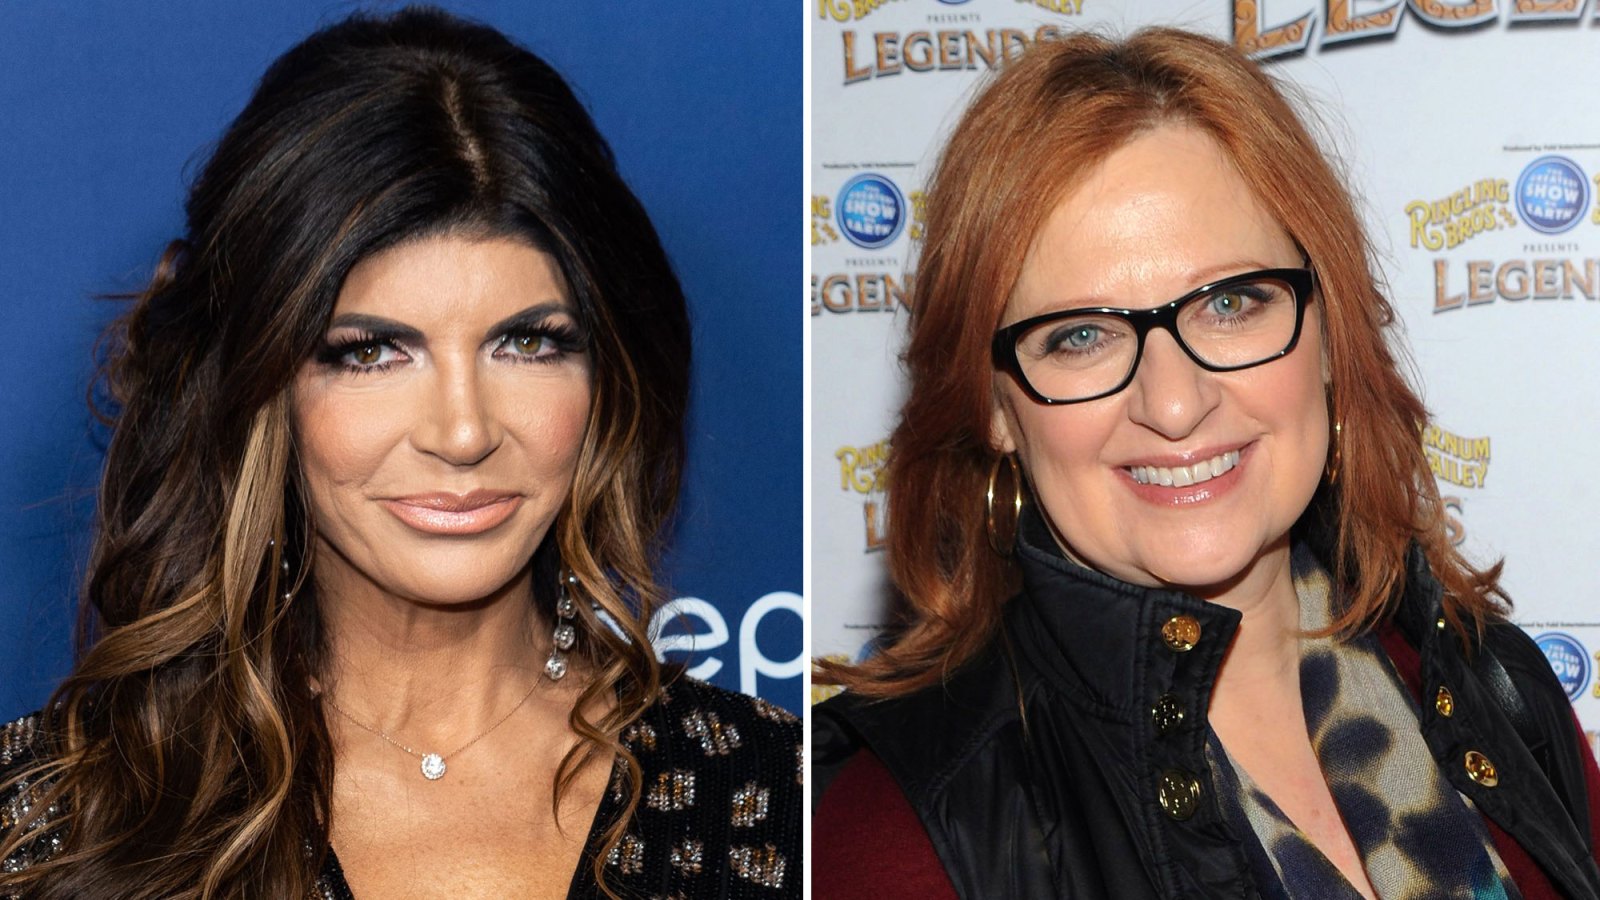 Teresa Giudice and Caroline Manzo Reunite After 'Real Housewives of New Jersey' Feud